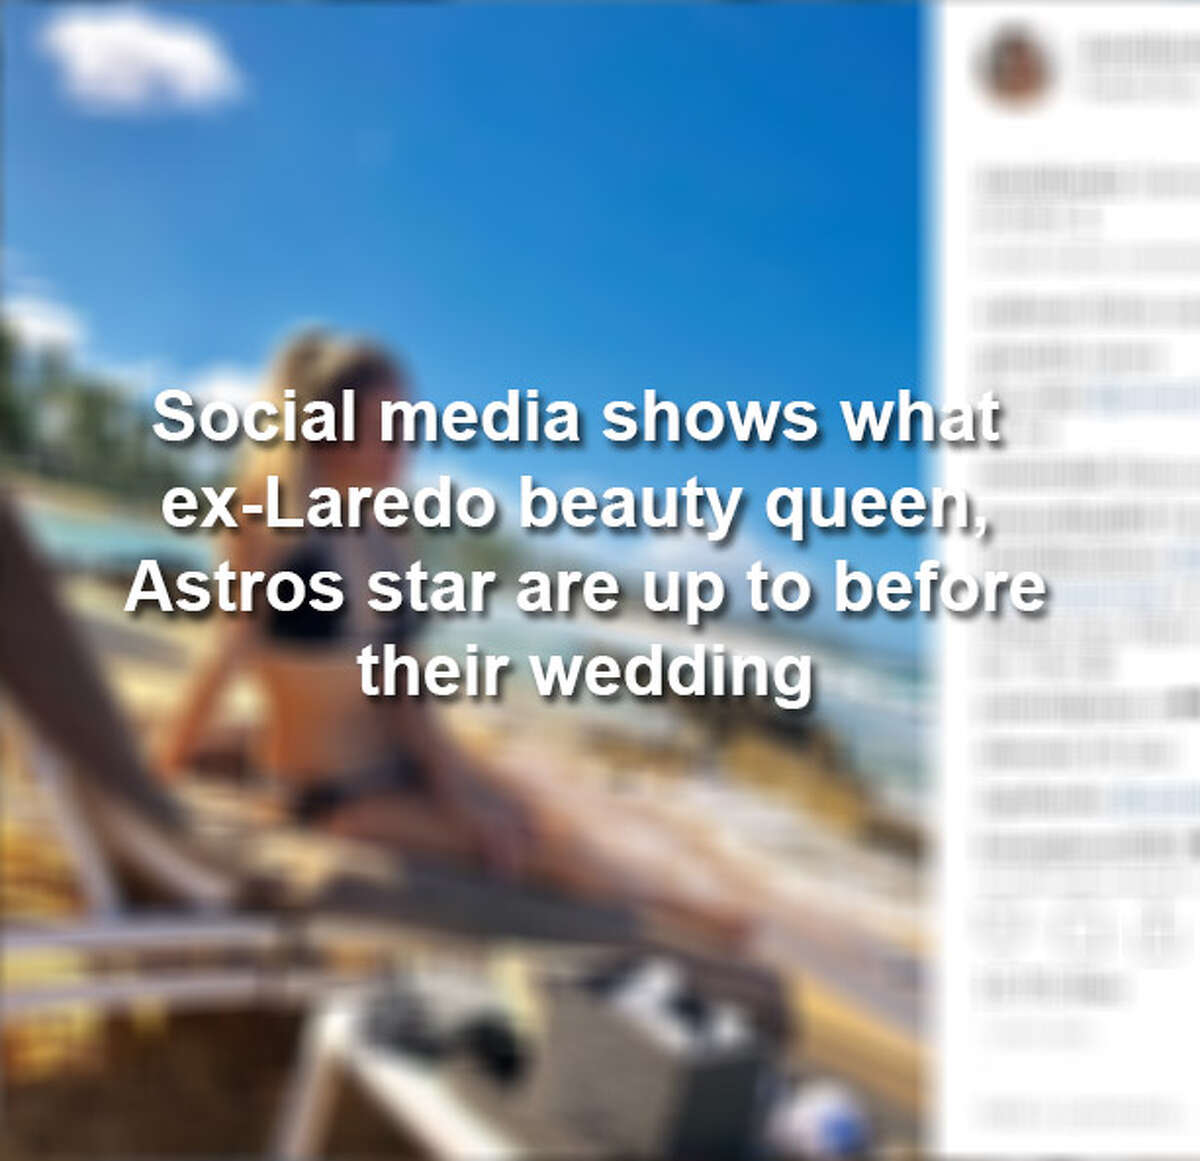 Keep scrolling to see how Laredo's Daniella Rodriguez and Astros shortstop Carlos Correa are spending time before their wedding.